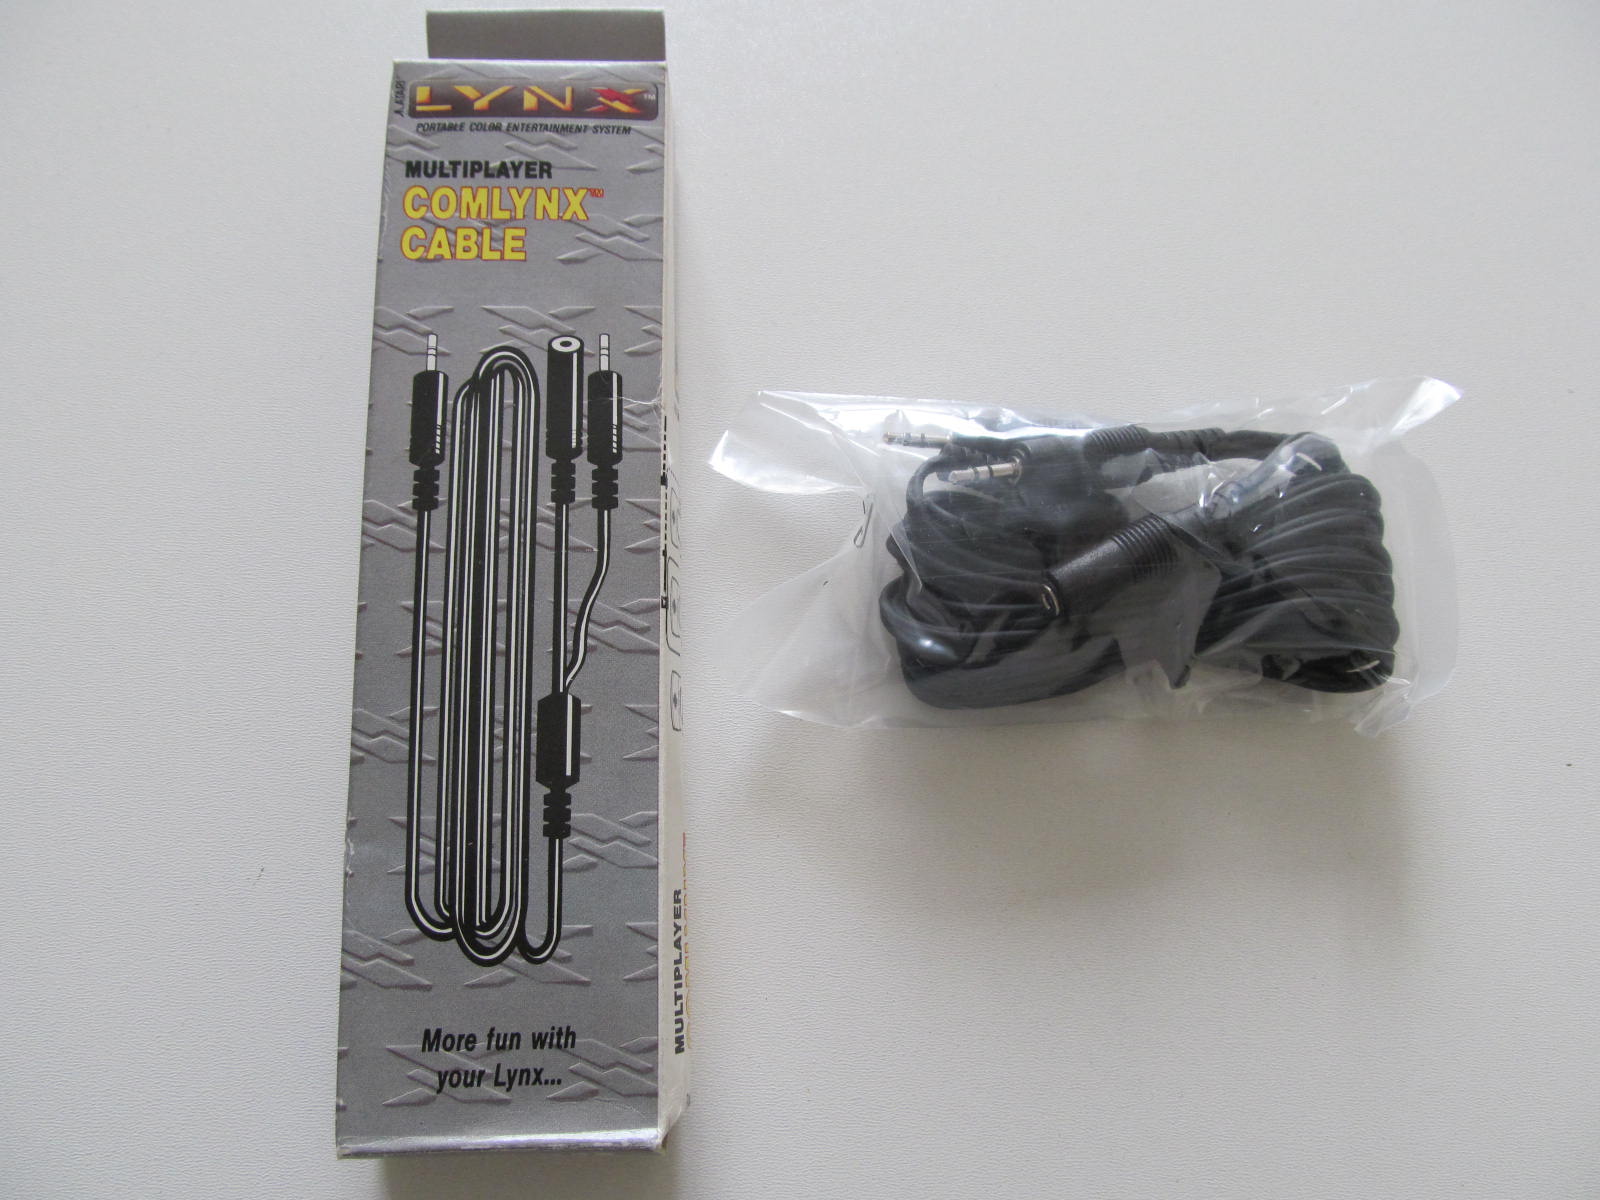 Multiplayer Comlynx Cable - Boxed